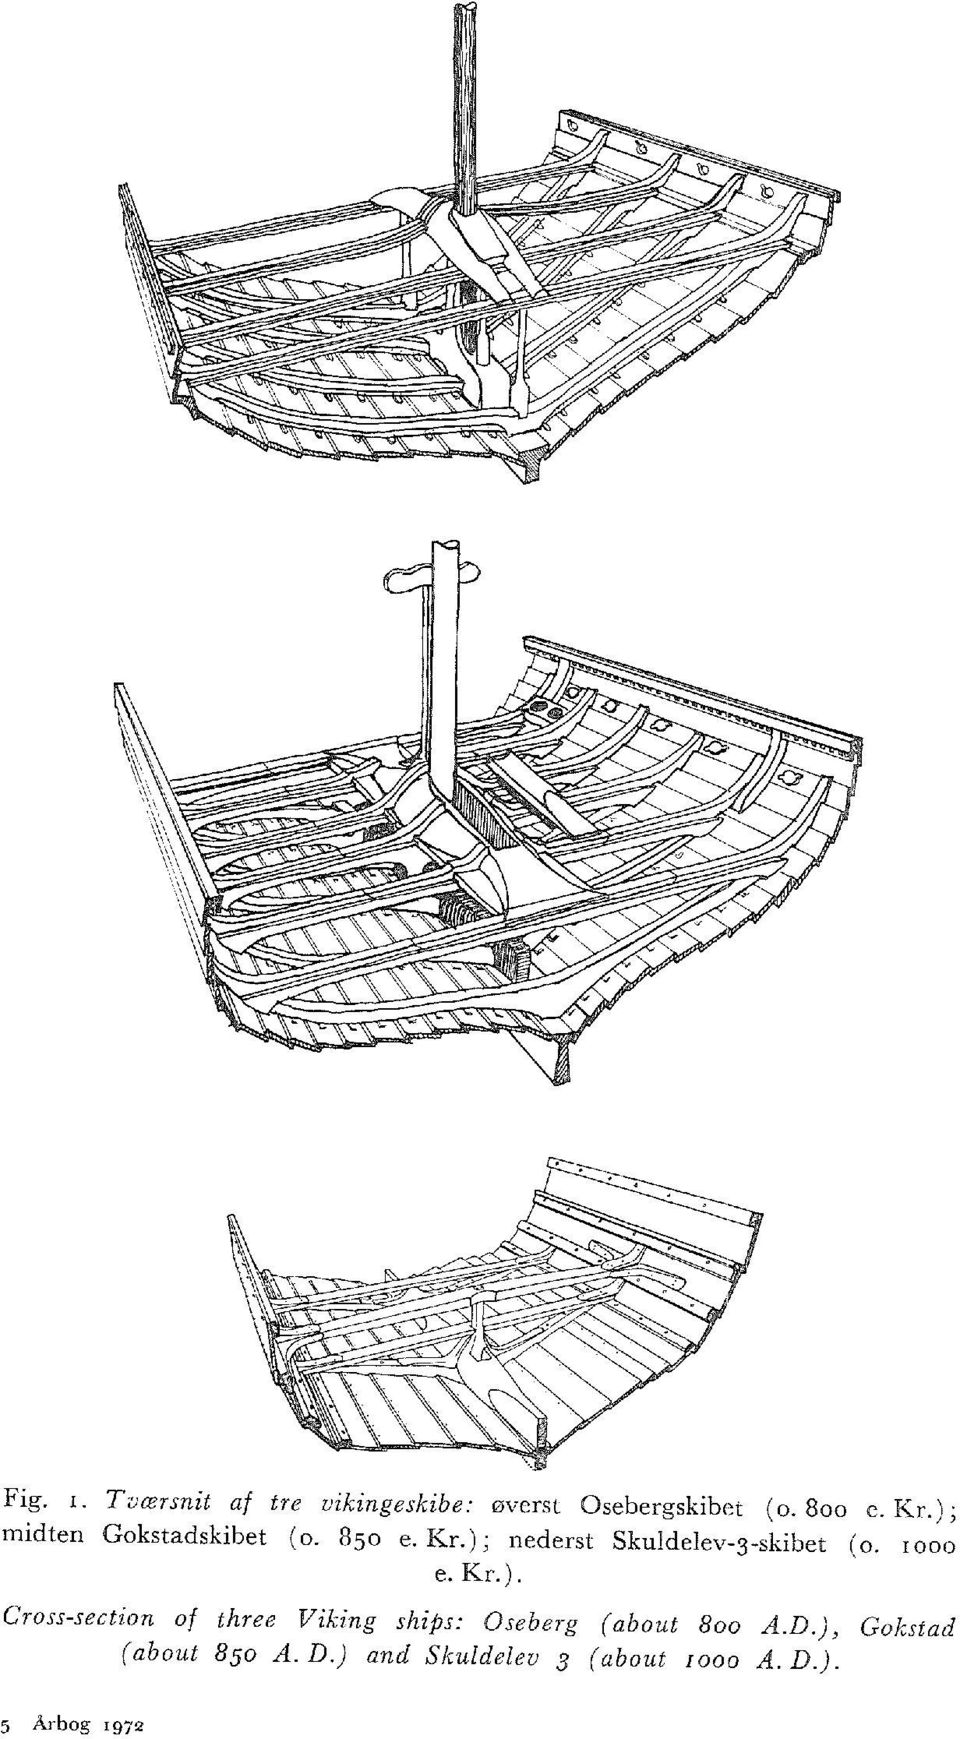 1000 e.kr.). Cross-section of three Viking ships: Oseberg (about 800 A.D.